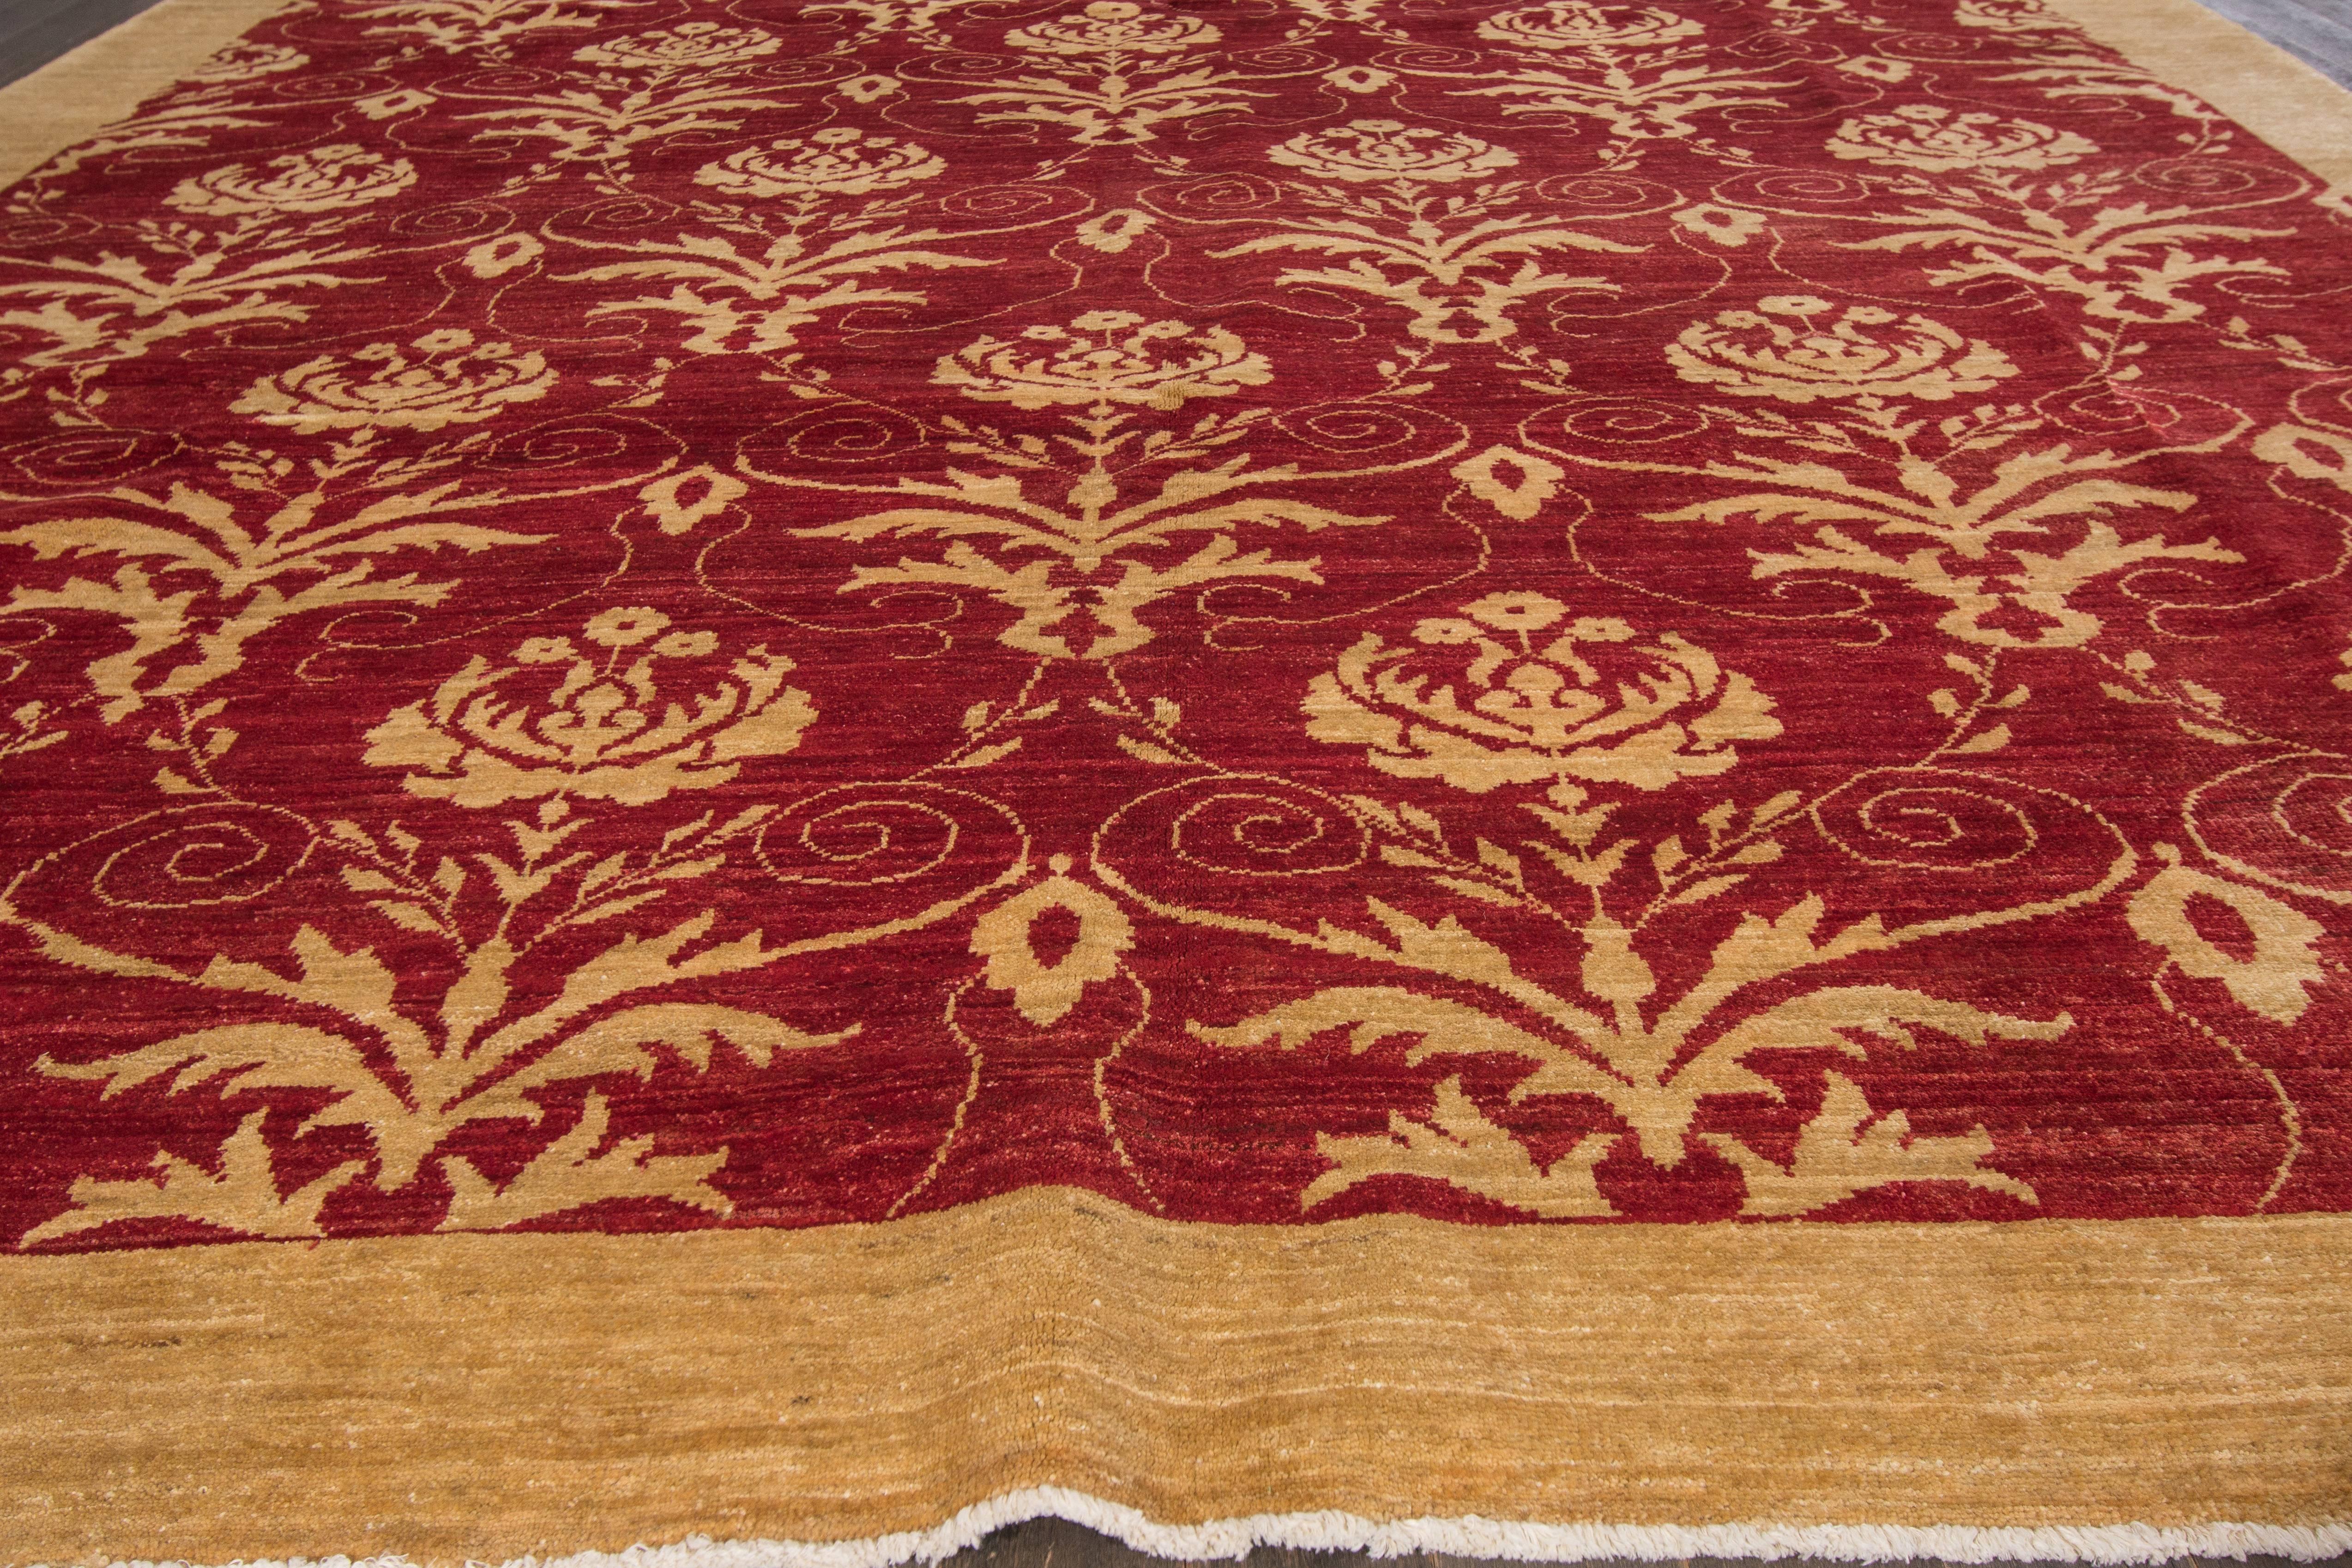 Hand knotted rug with a floral design on a red field with beige borders. 

This rug has magnificent detailing and would be perfect for any room. Measures: 11'6